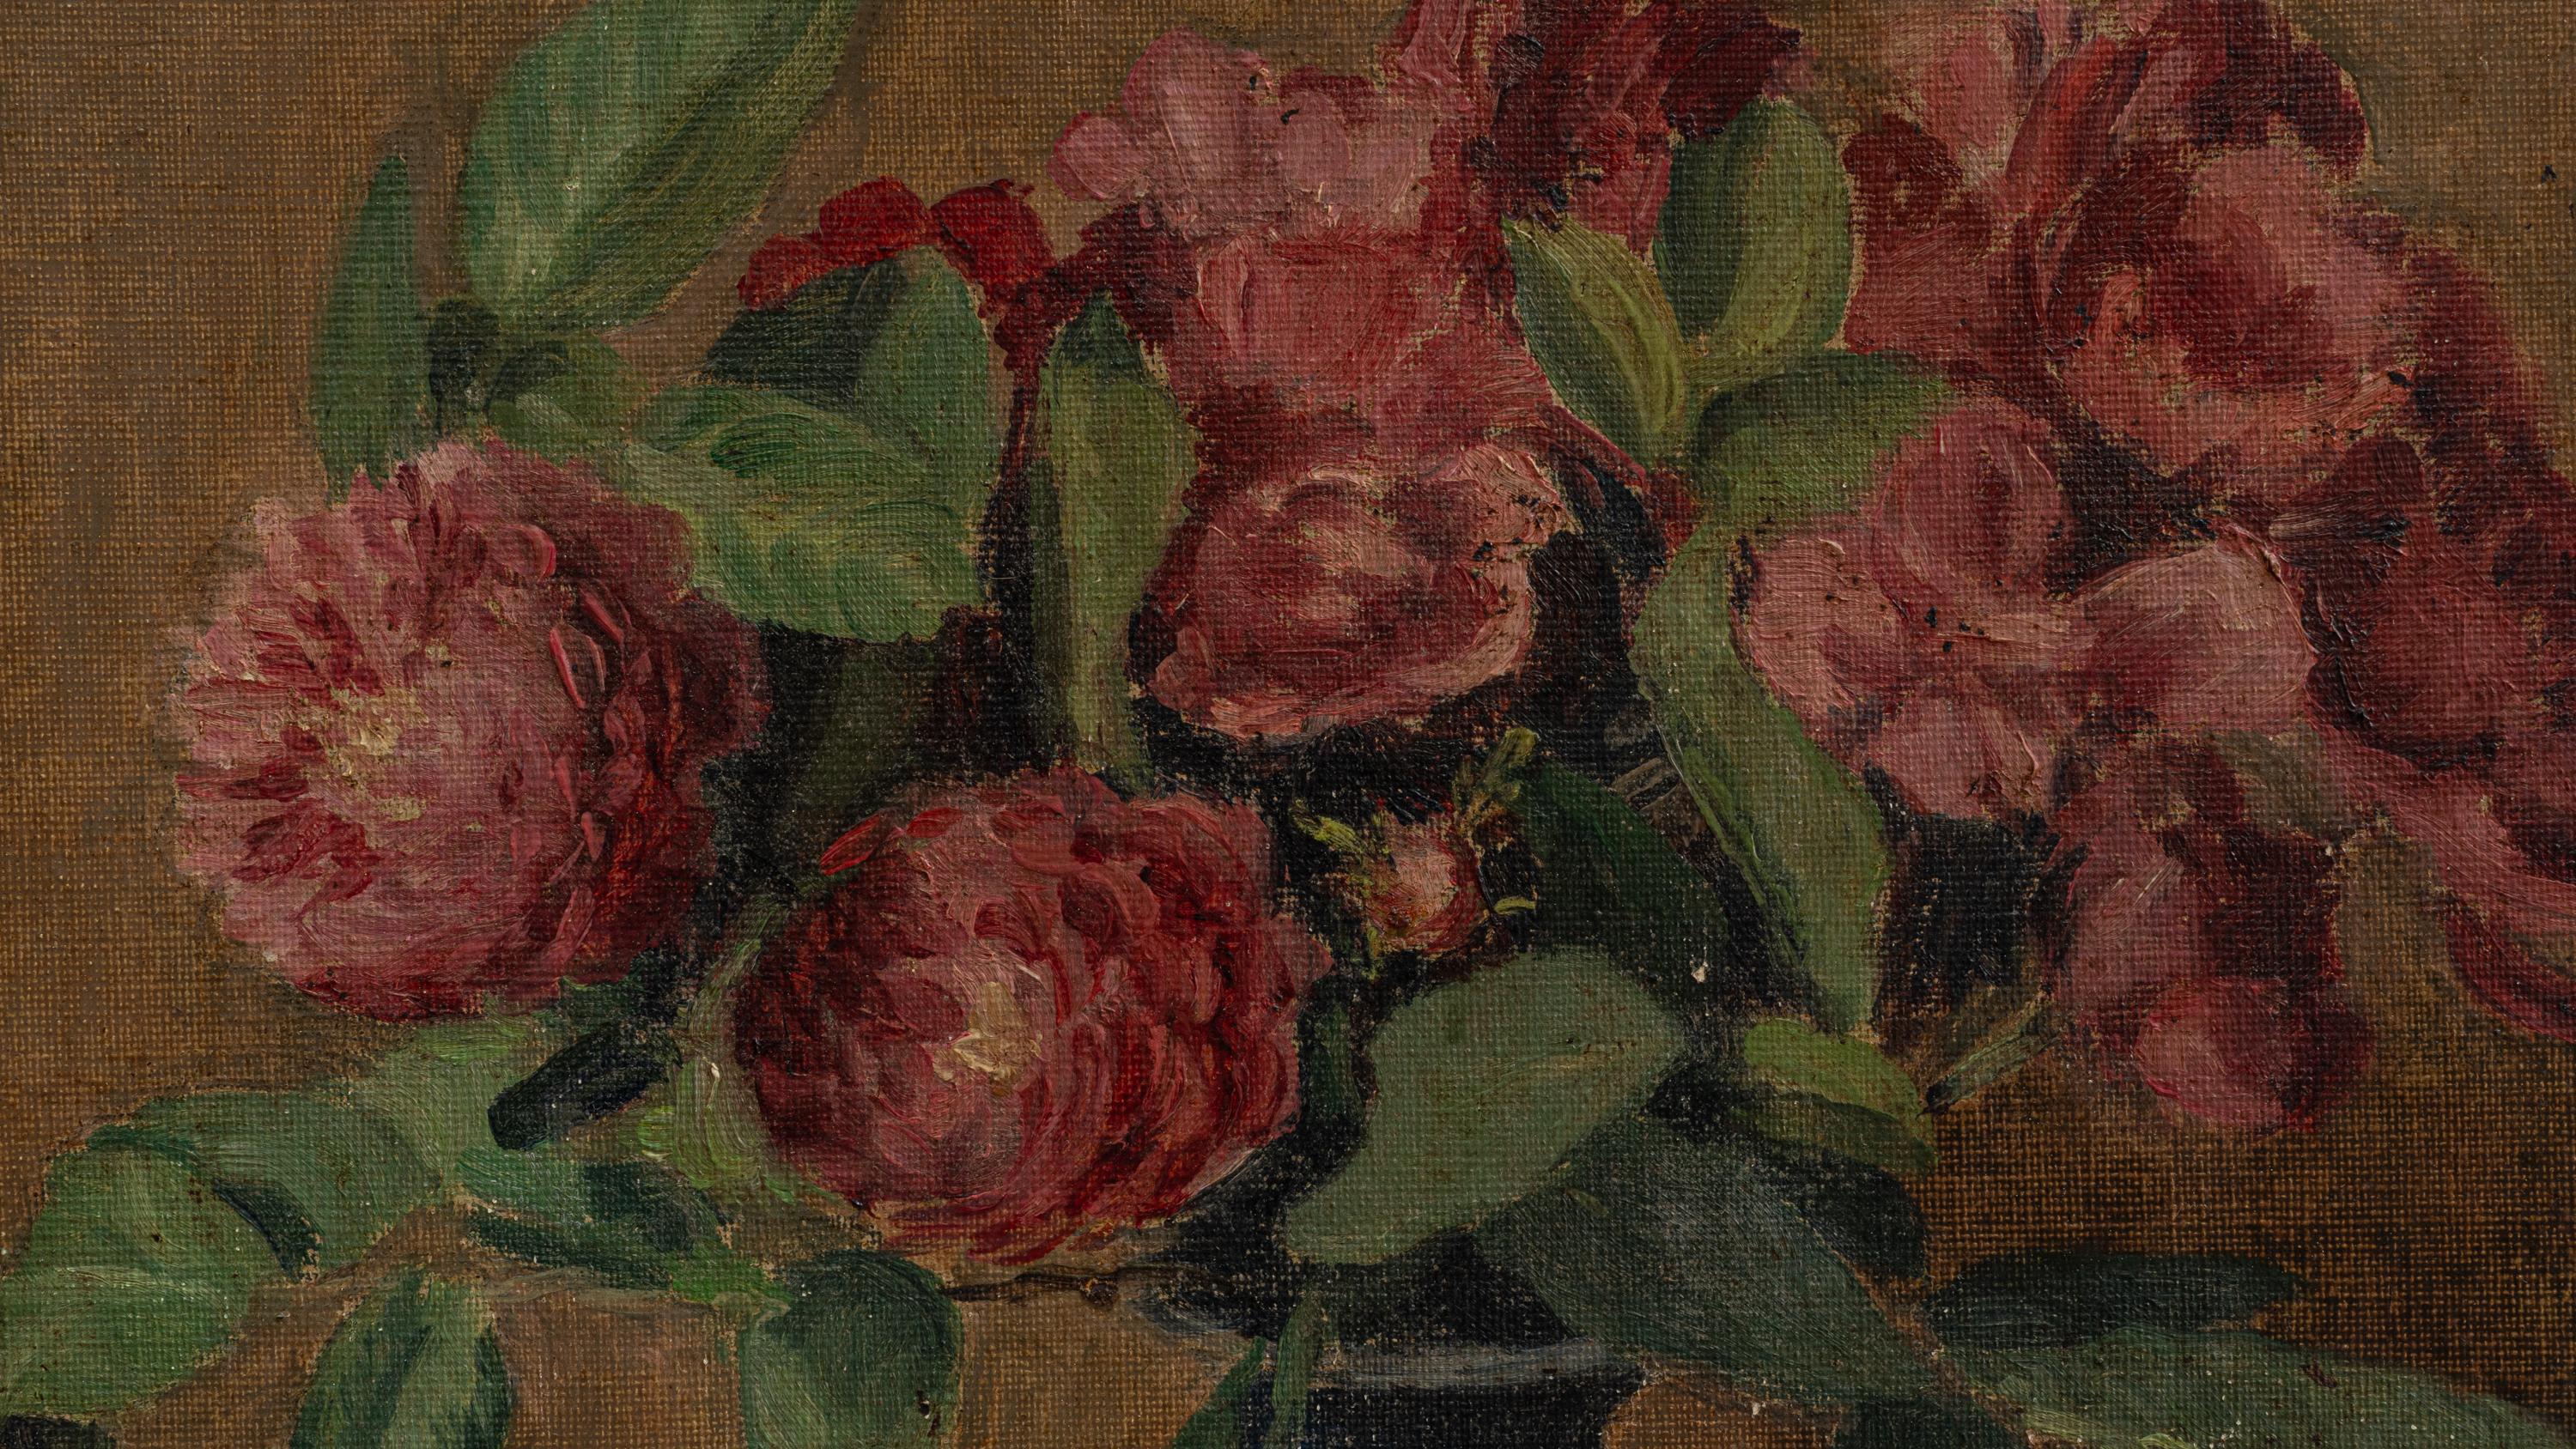 This 20th Century Belgian painting portrays a beautifully simple still life, featuring a vase of lush, red peonies. The textured brushwork and the depth of the crimson blooms against the neutral background capture the vibrant yet transient beauty of